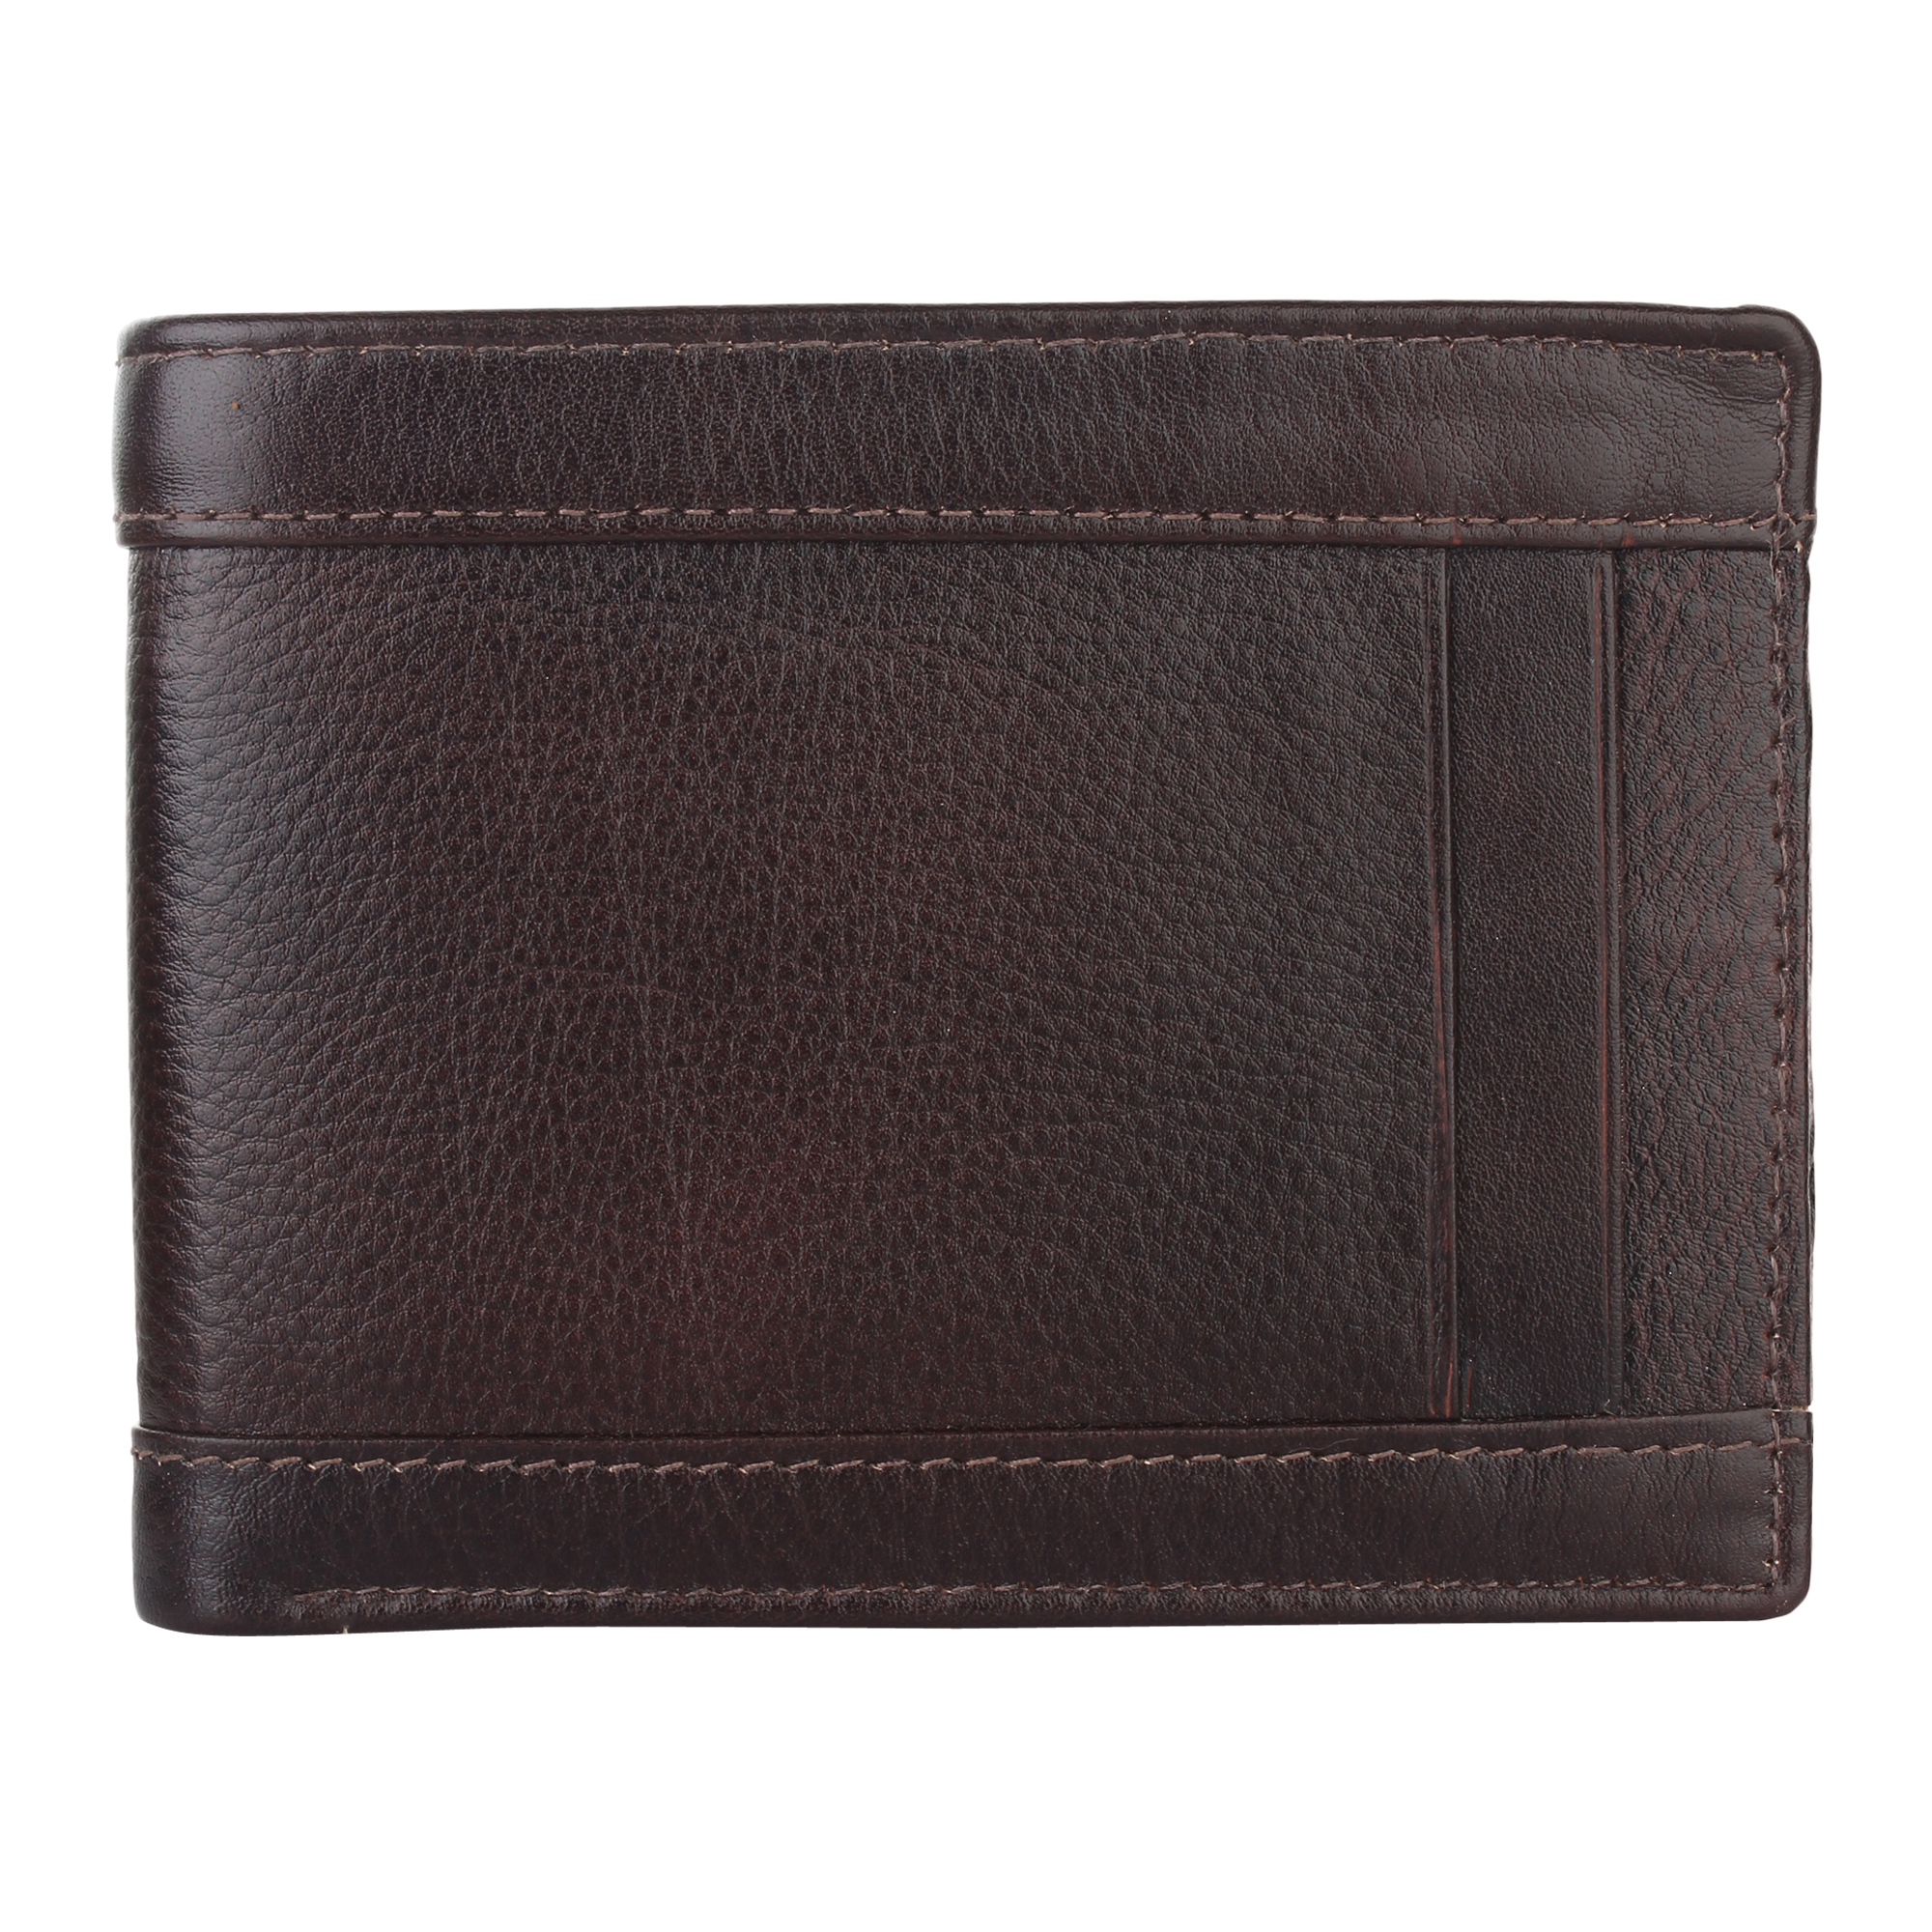 Leather Wallets Manufacturers in Delhi, Leather Wallets Suppliers in Delhi, Leather Wallets Wholesalers in Delhi, Leather Wallets Traders in Delhi, custom leather wallet manufacturers in Delhi, Leathe